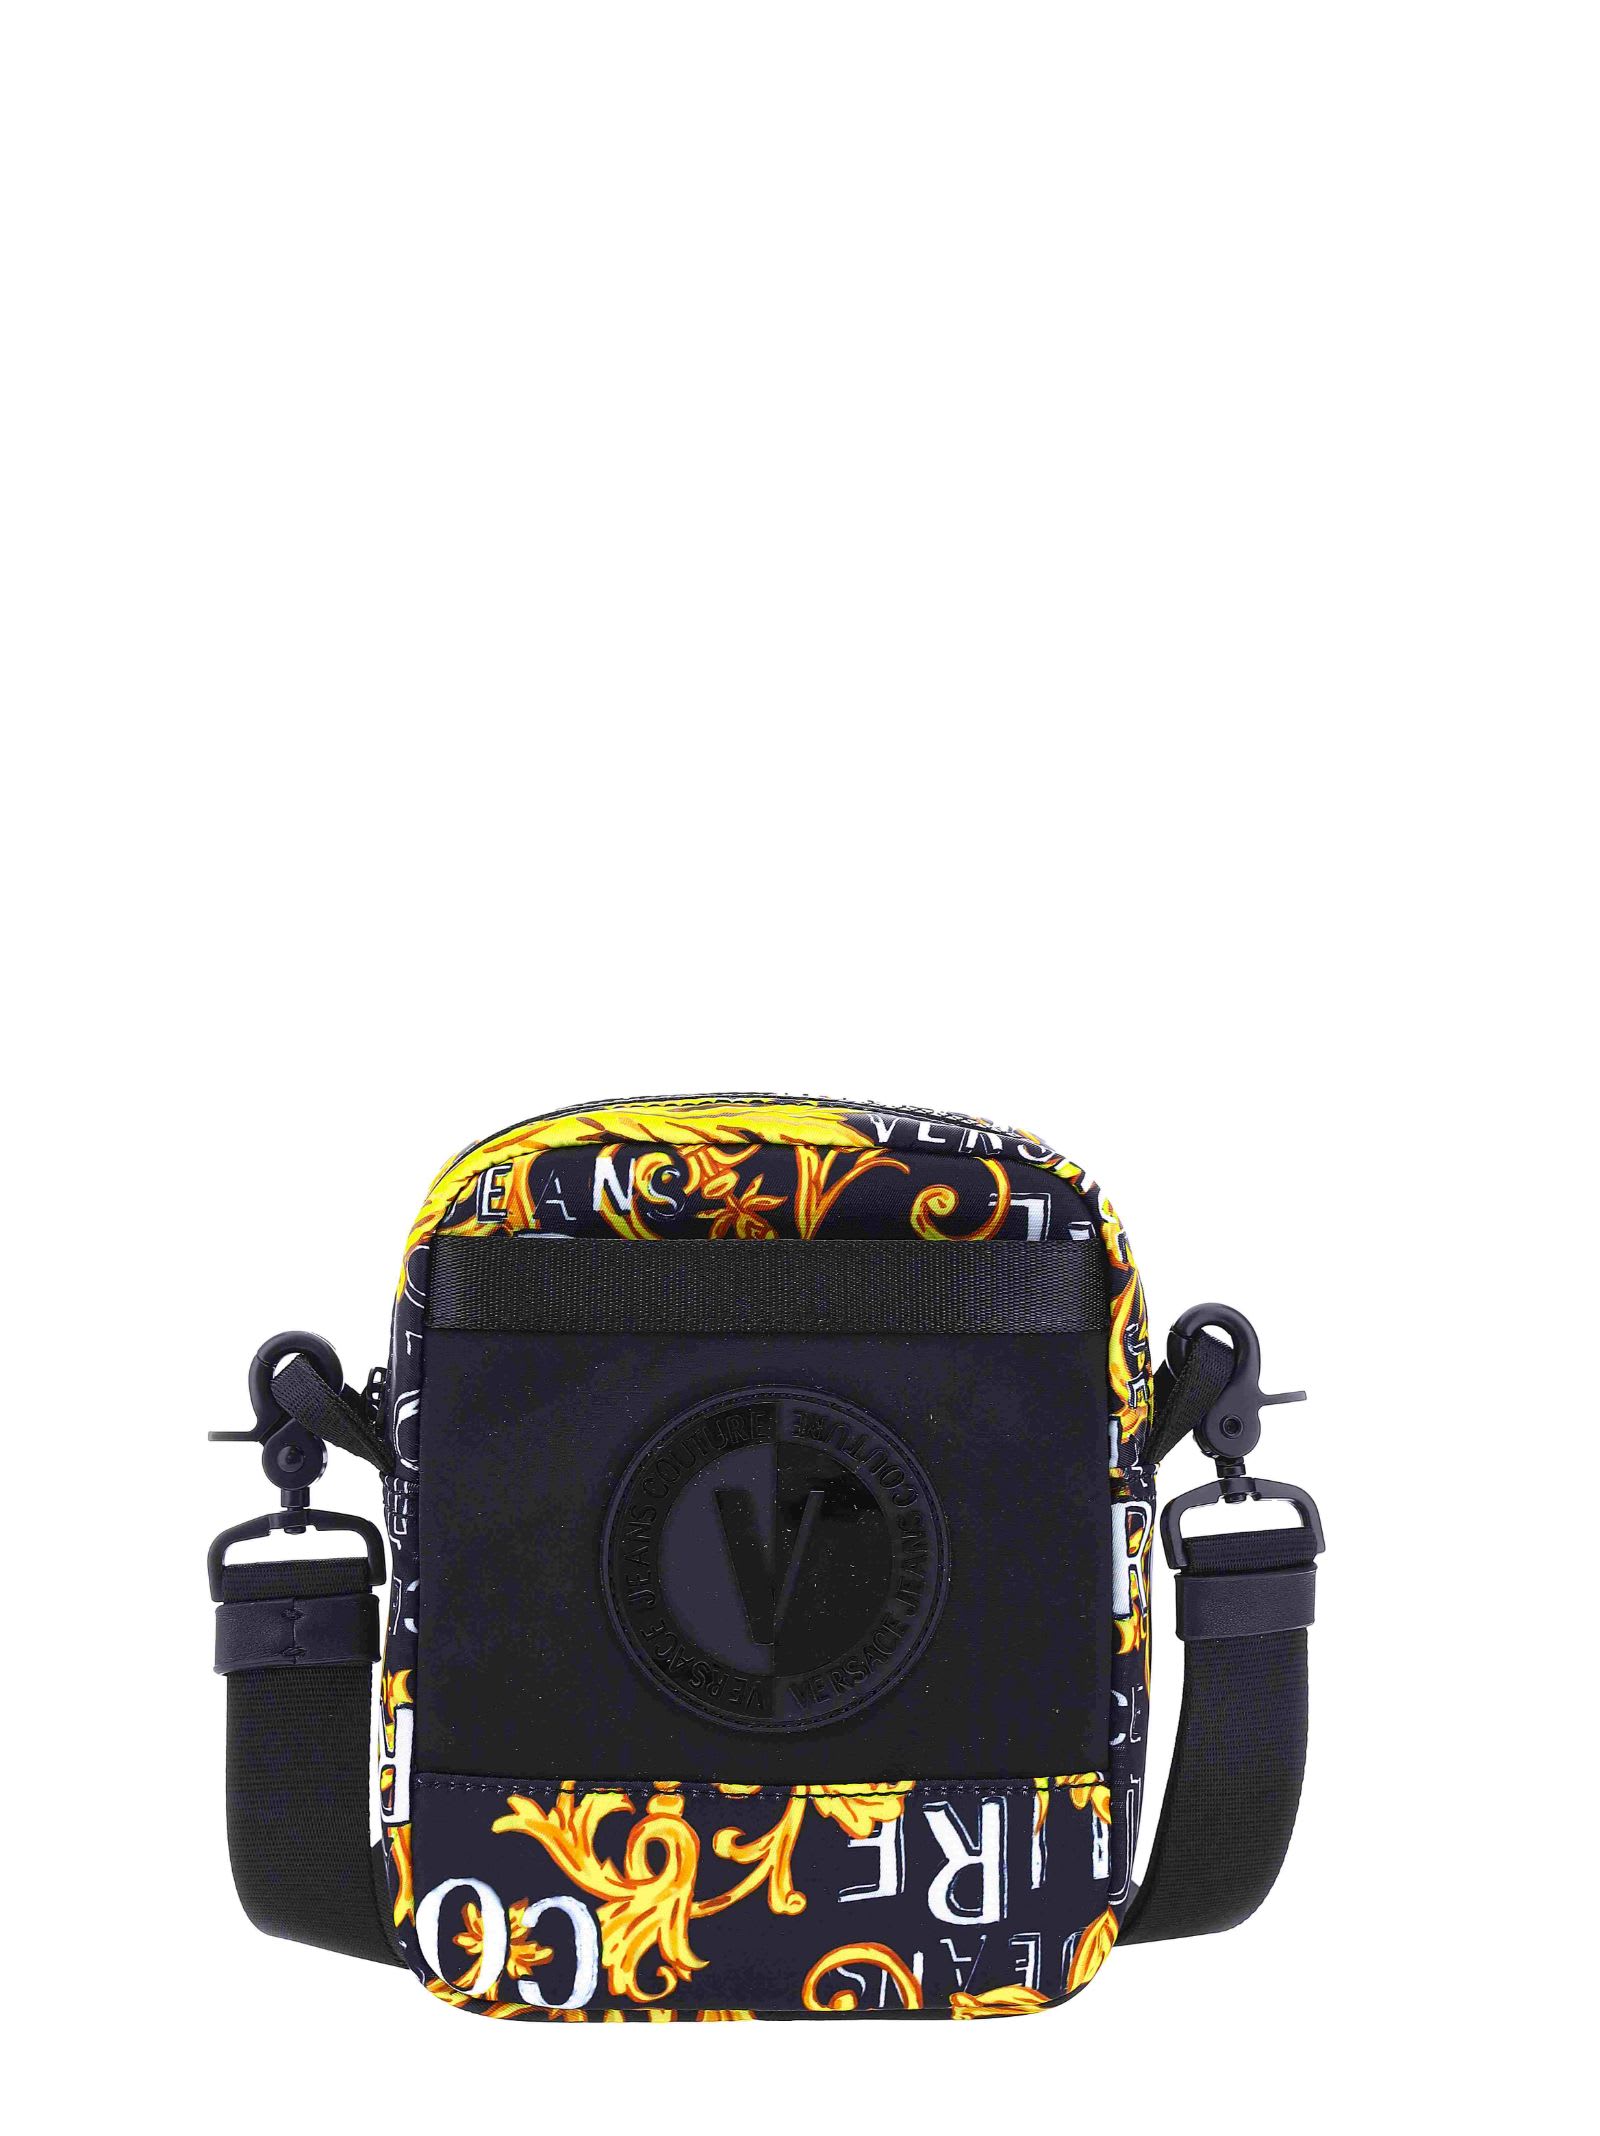 Versace Jeans Couture Bag In Black/gold